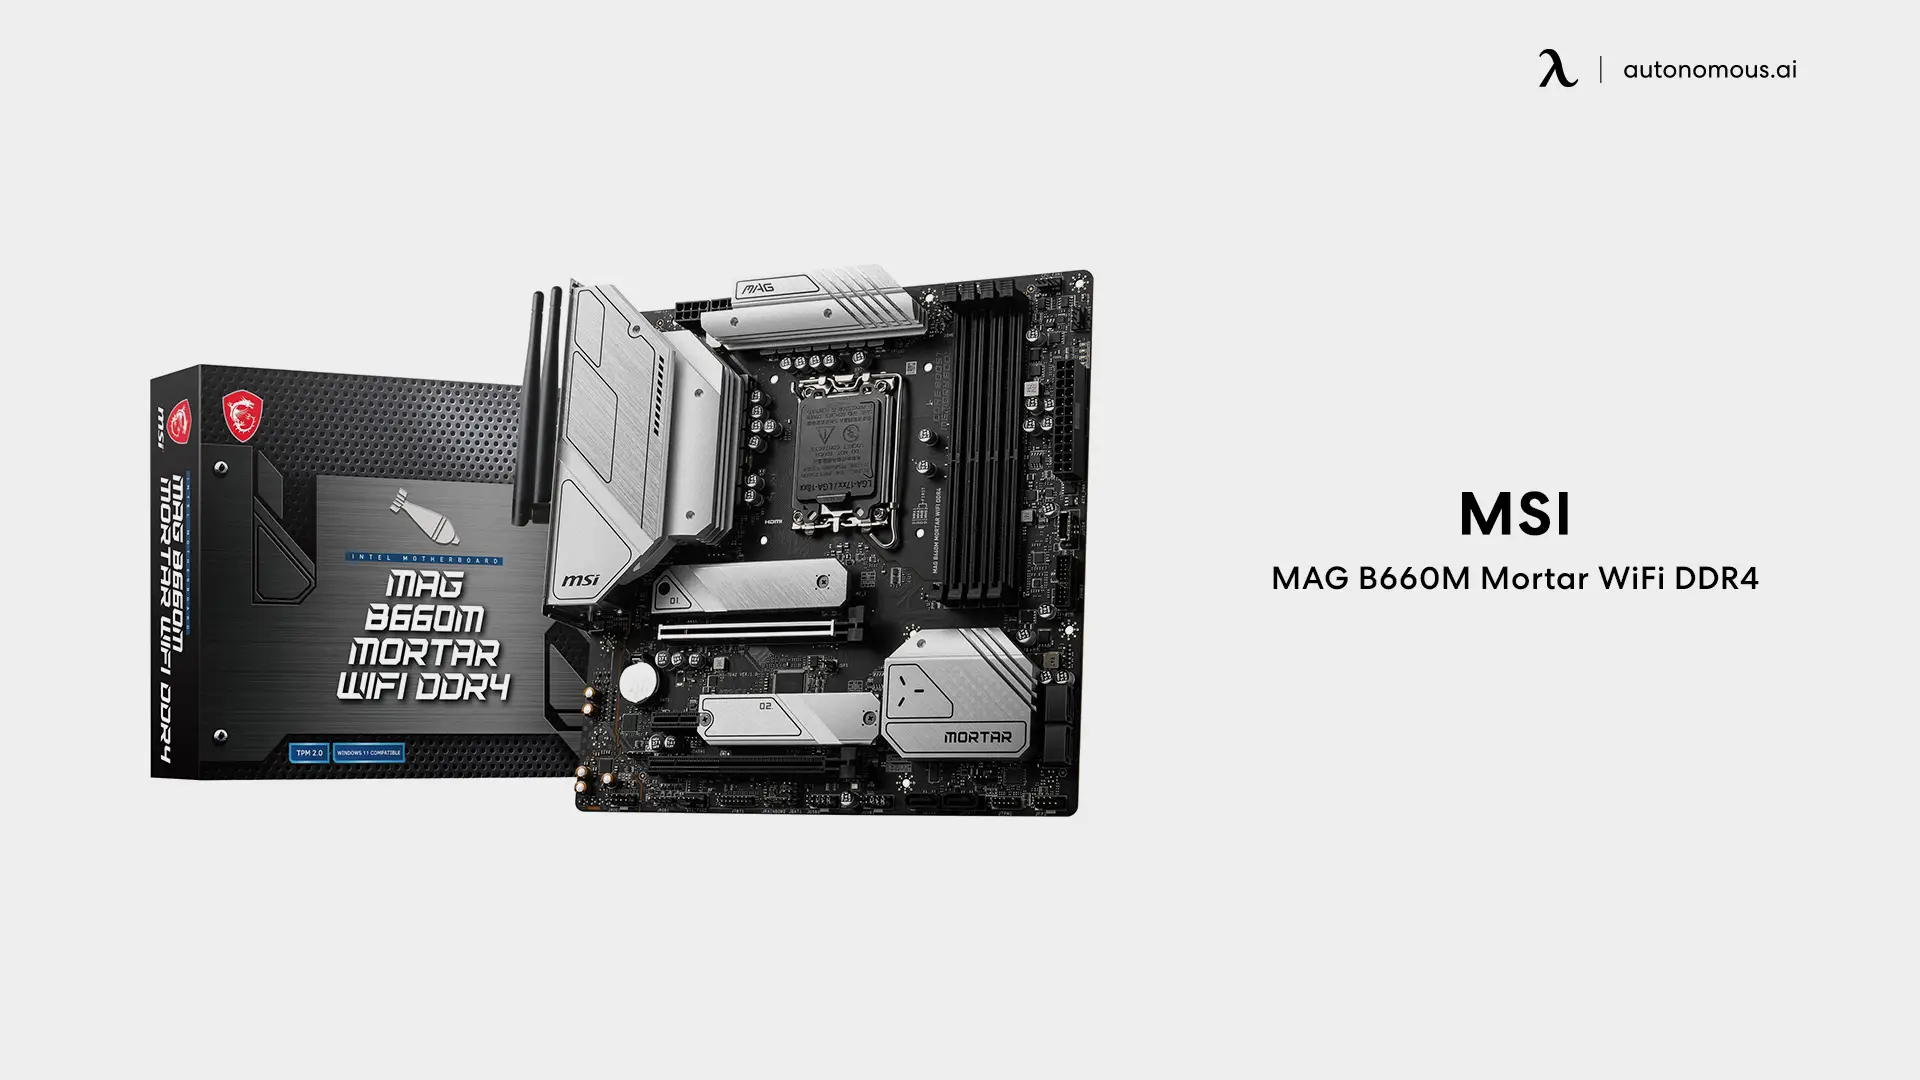 MAG B660M Mortar WiFi DDR4 from MSI